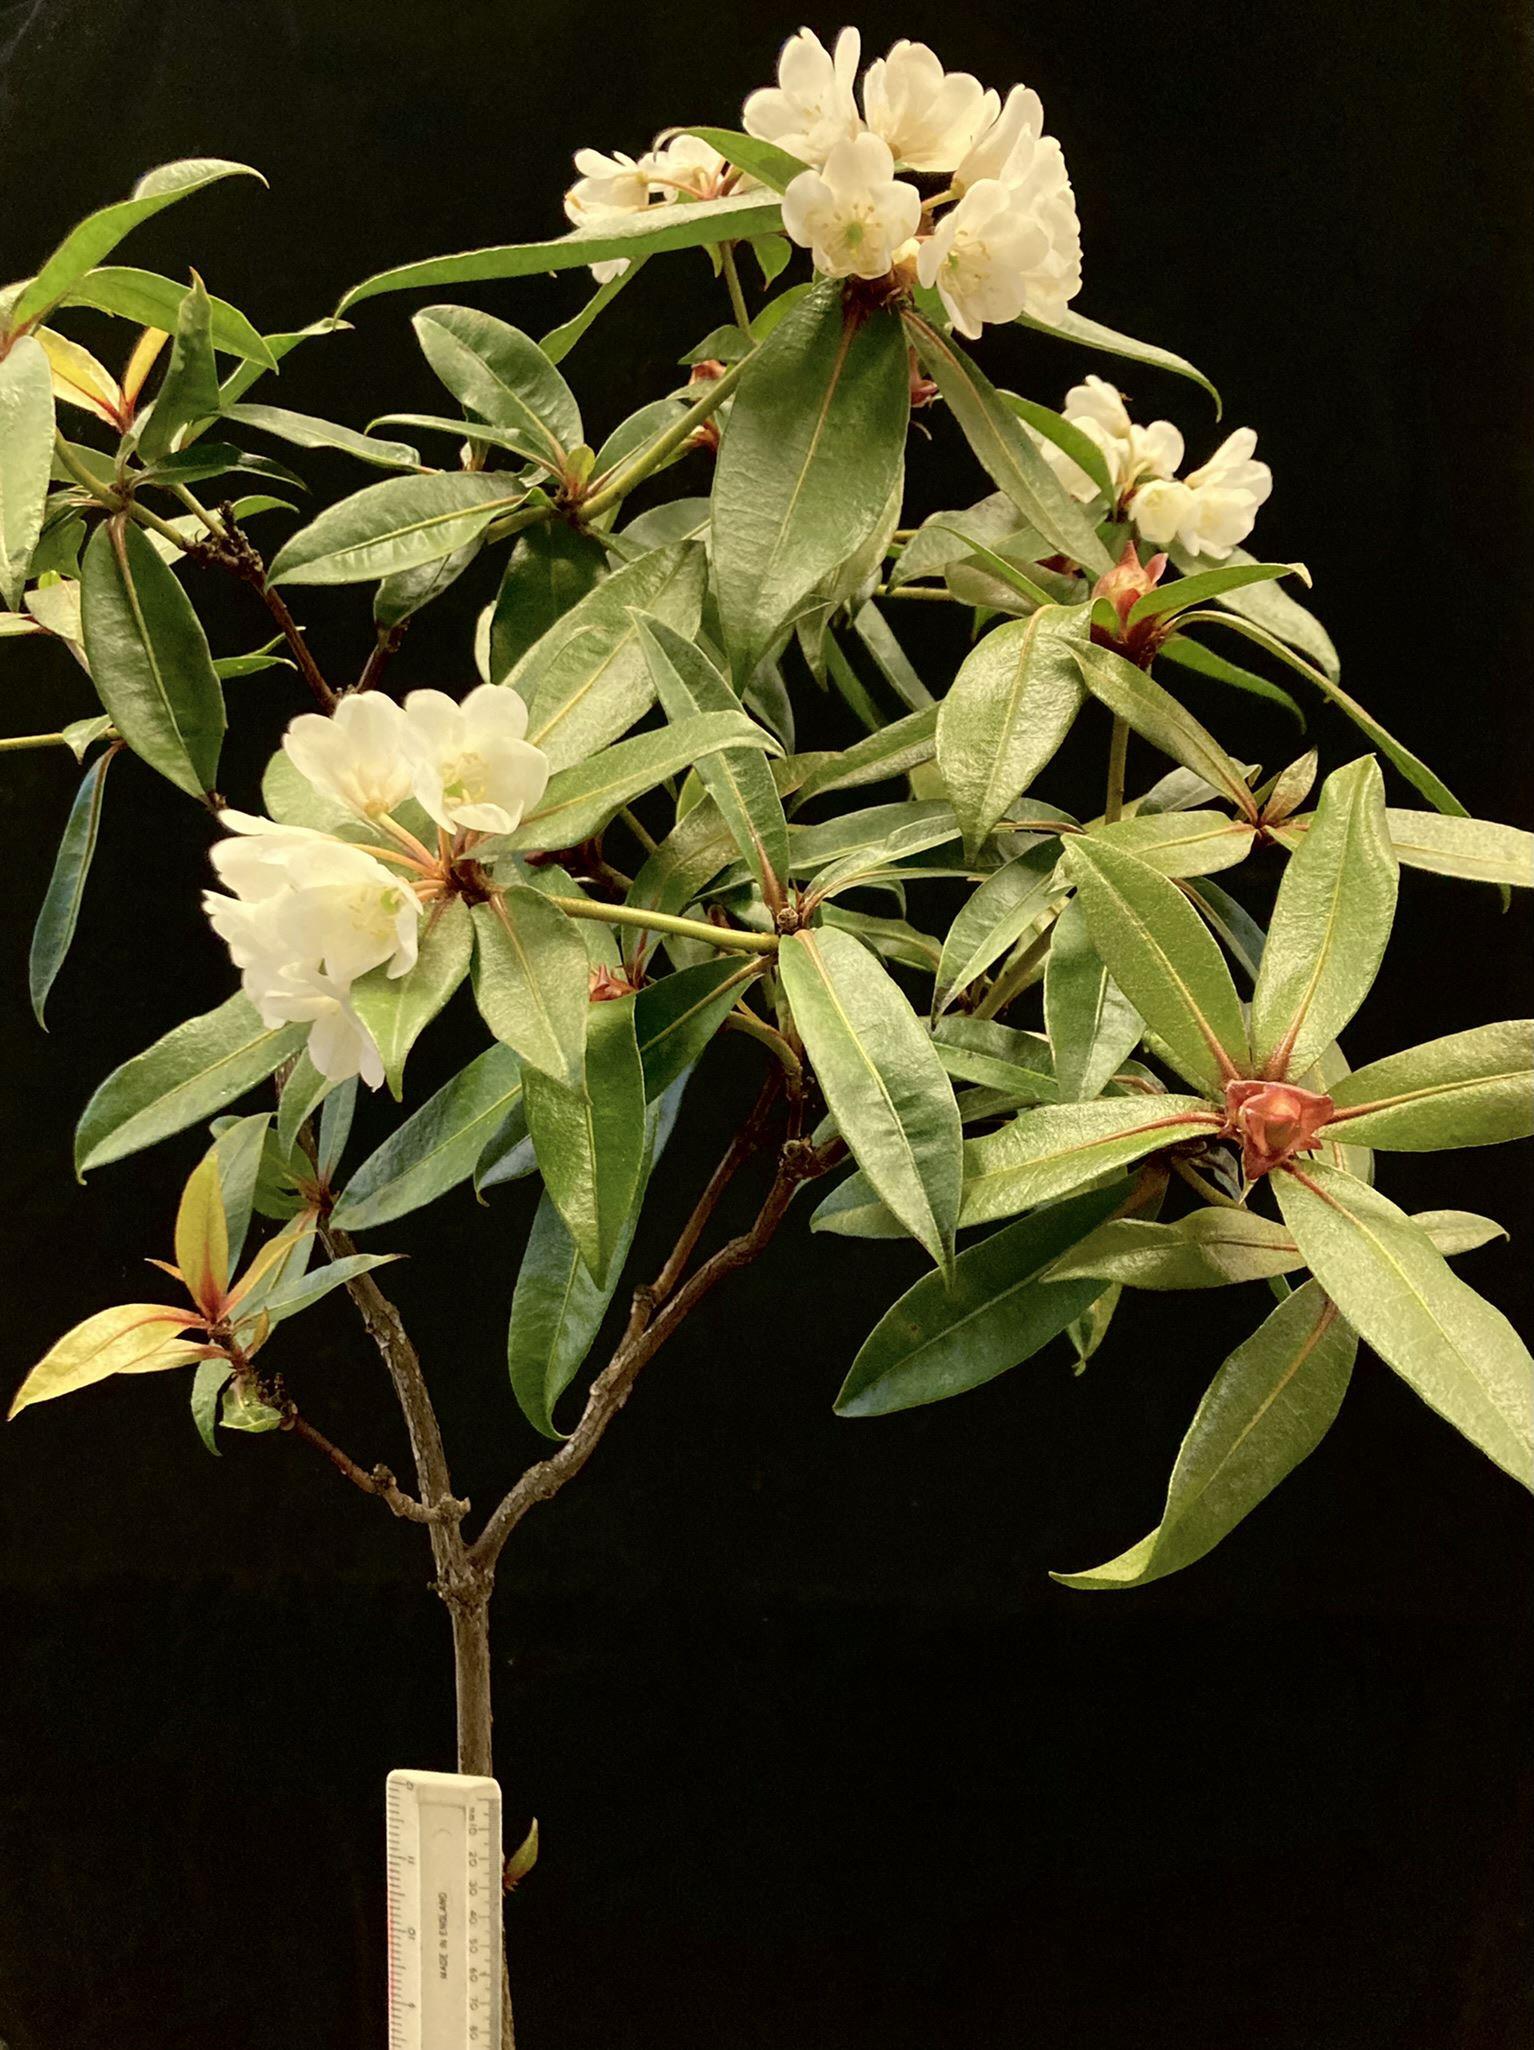 Rhododendron lanceolatum, a small flowering shrub, with a ruler for scale